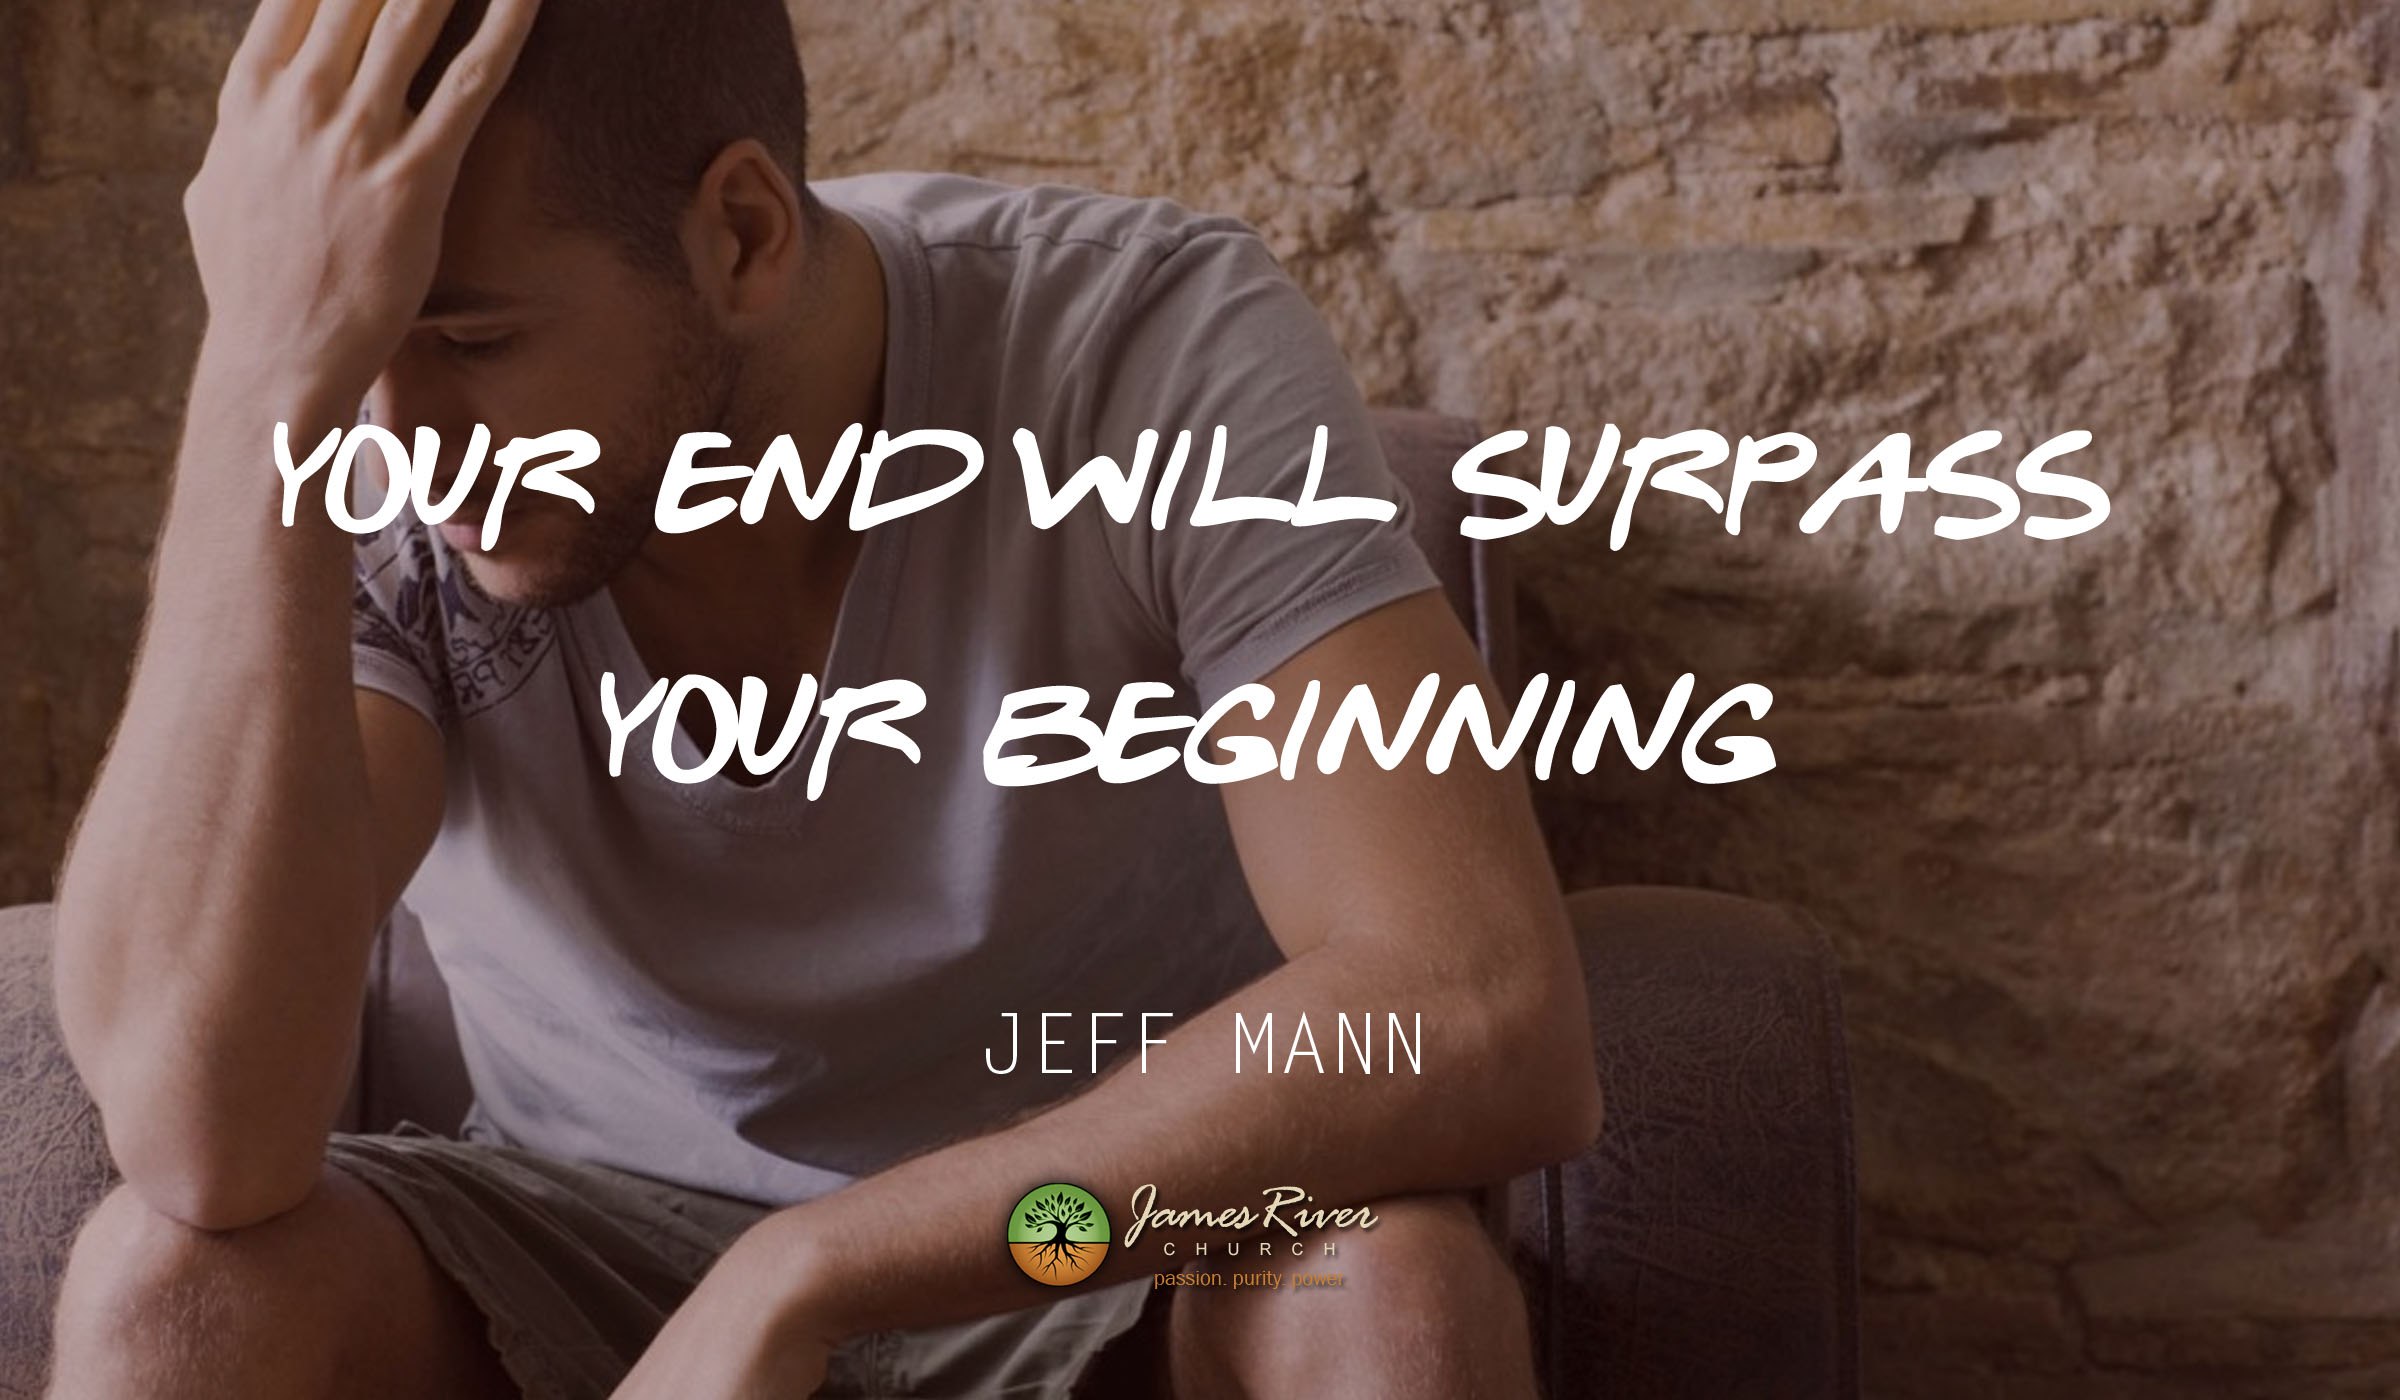 Your End Will Surpass Your Beginning